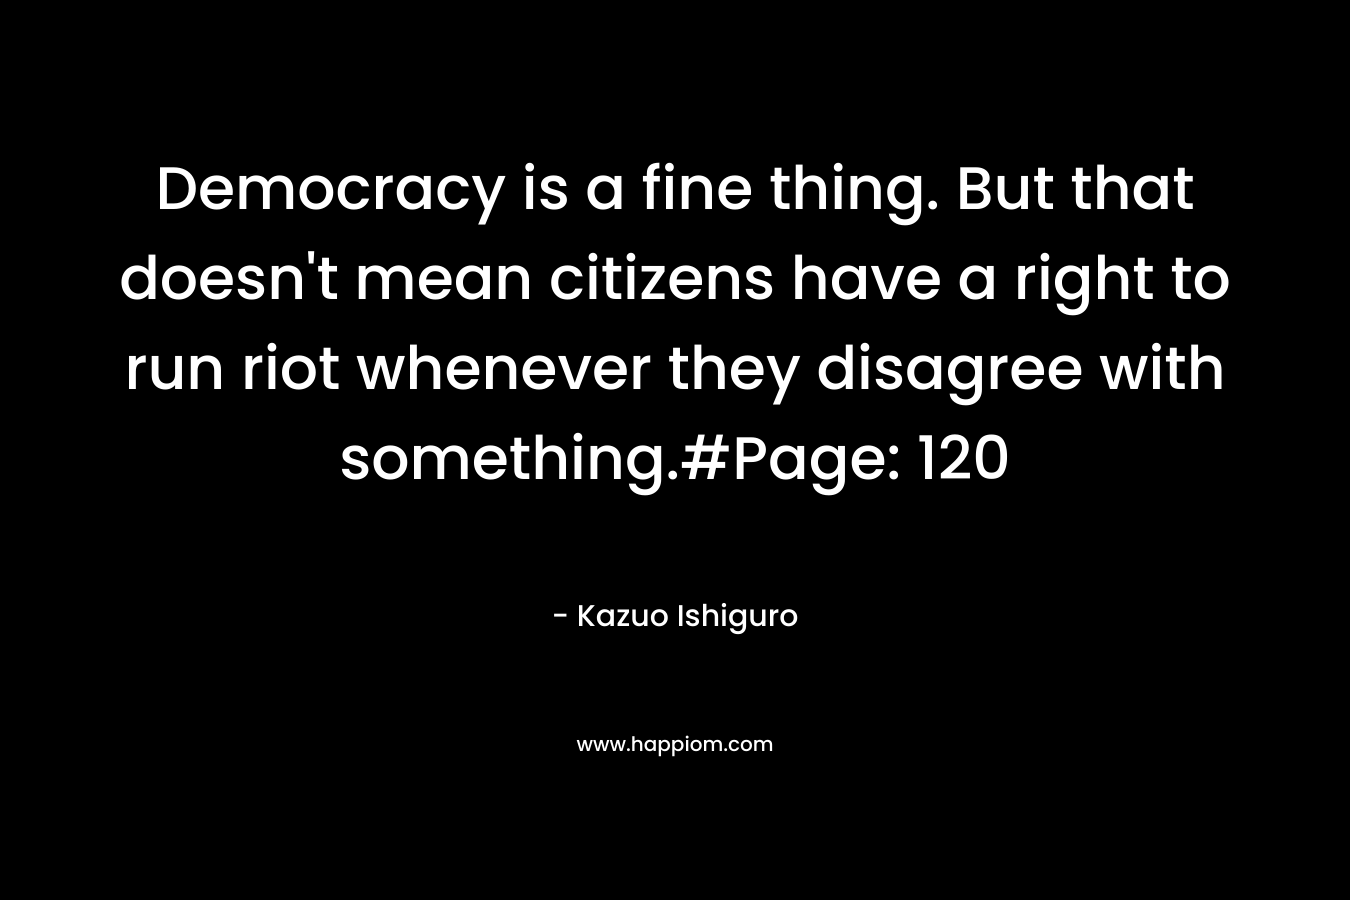 Democracy is a fine thing. But that doesn't mean citizens have a right to run riot whenever they disagree with something.#Page: 120